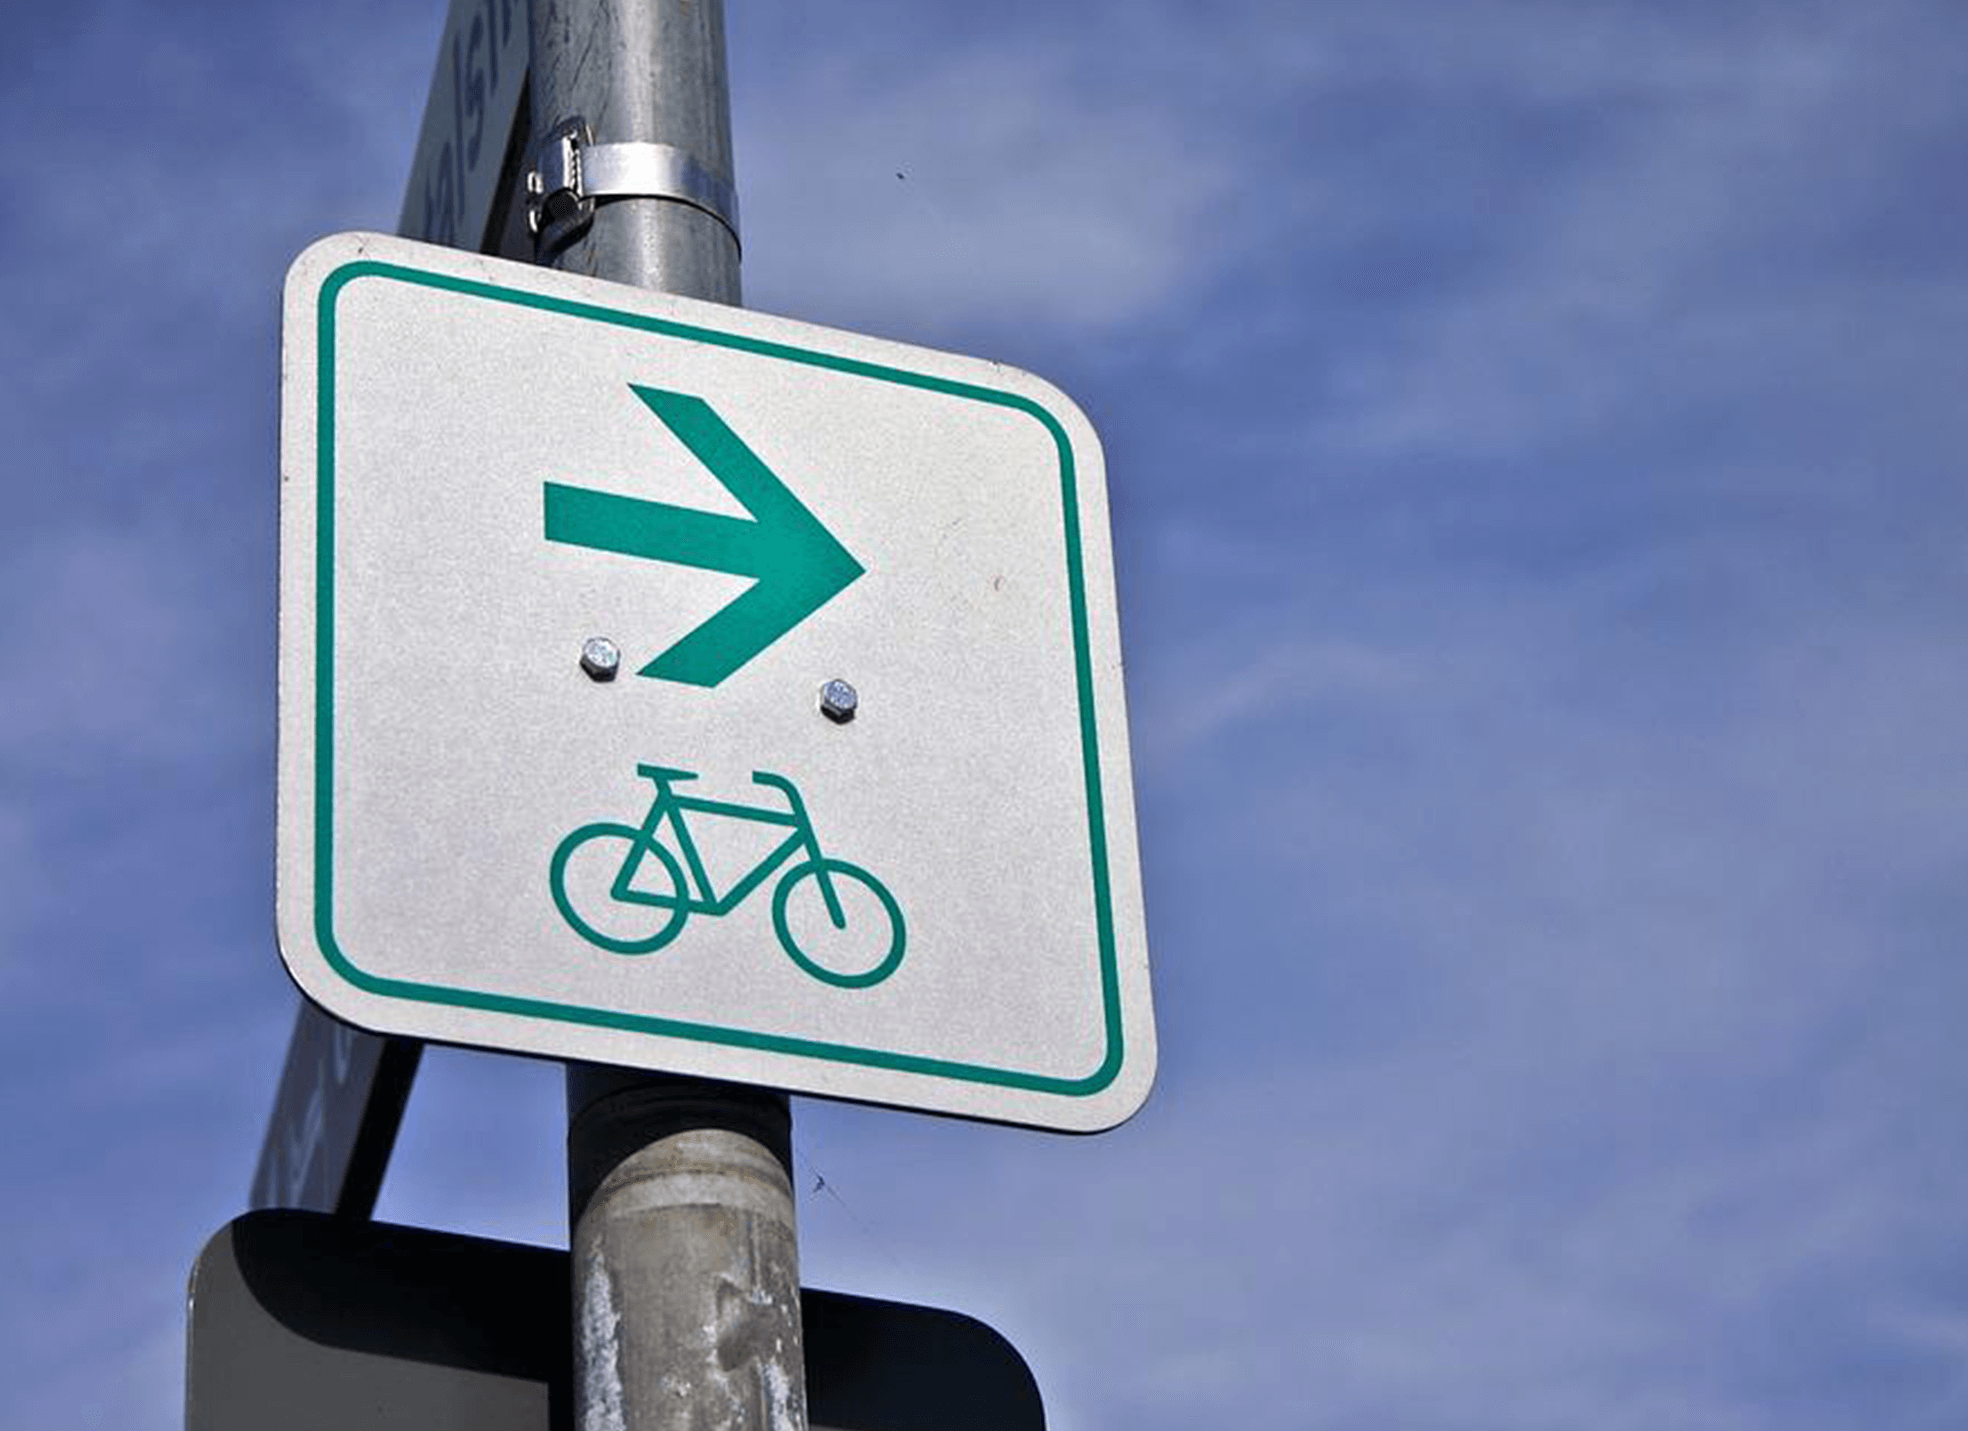 WestLAND's Group Multimodal Network Image - Shows a bike street sign.